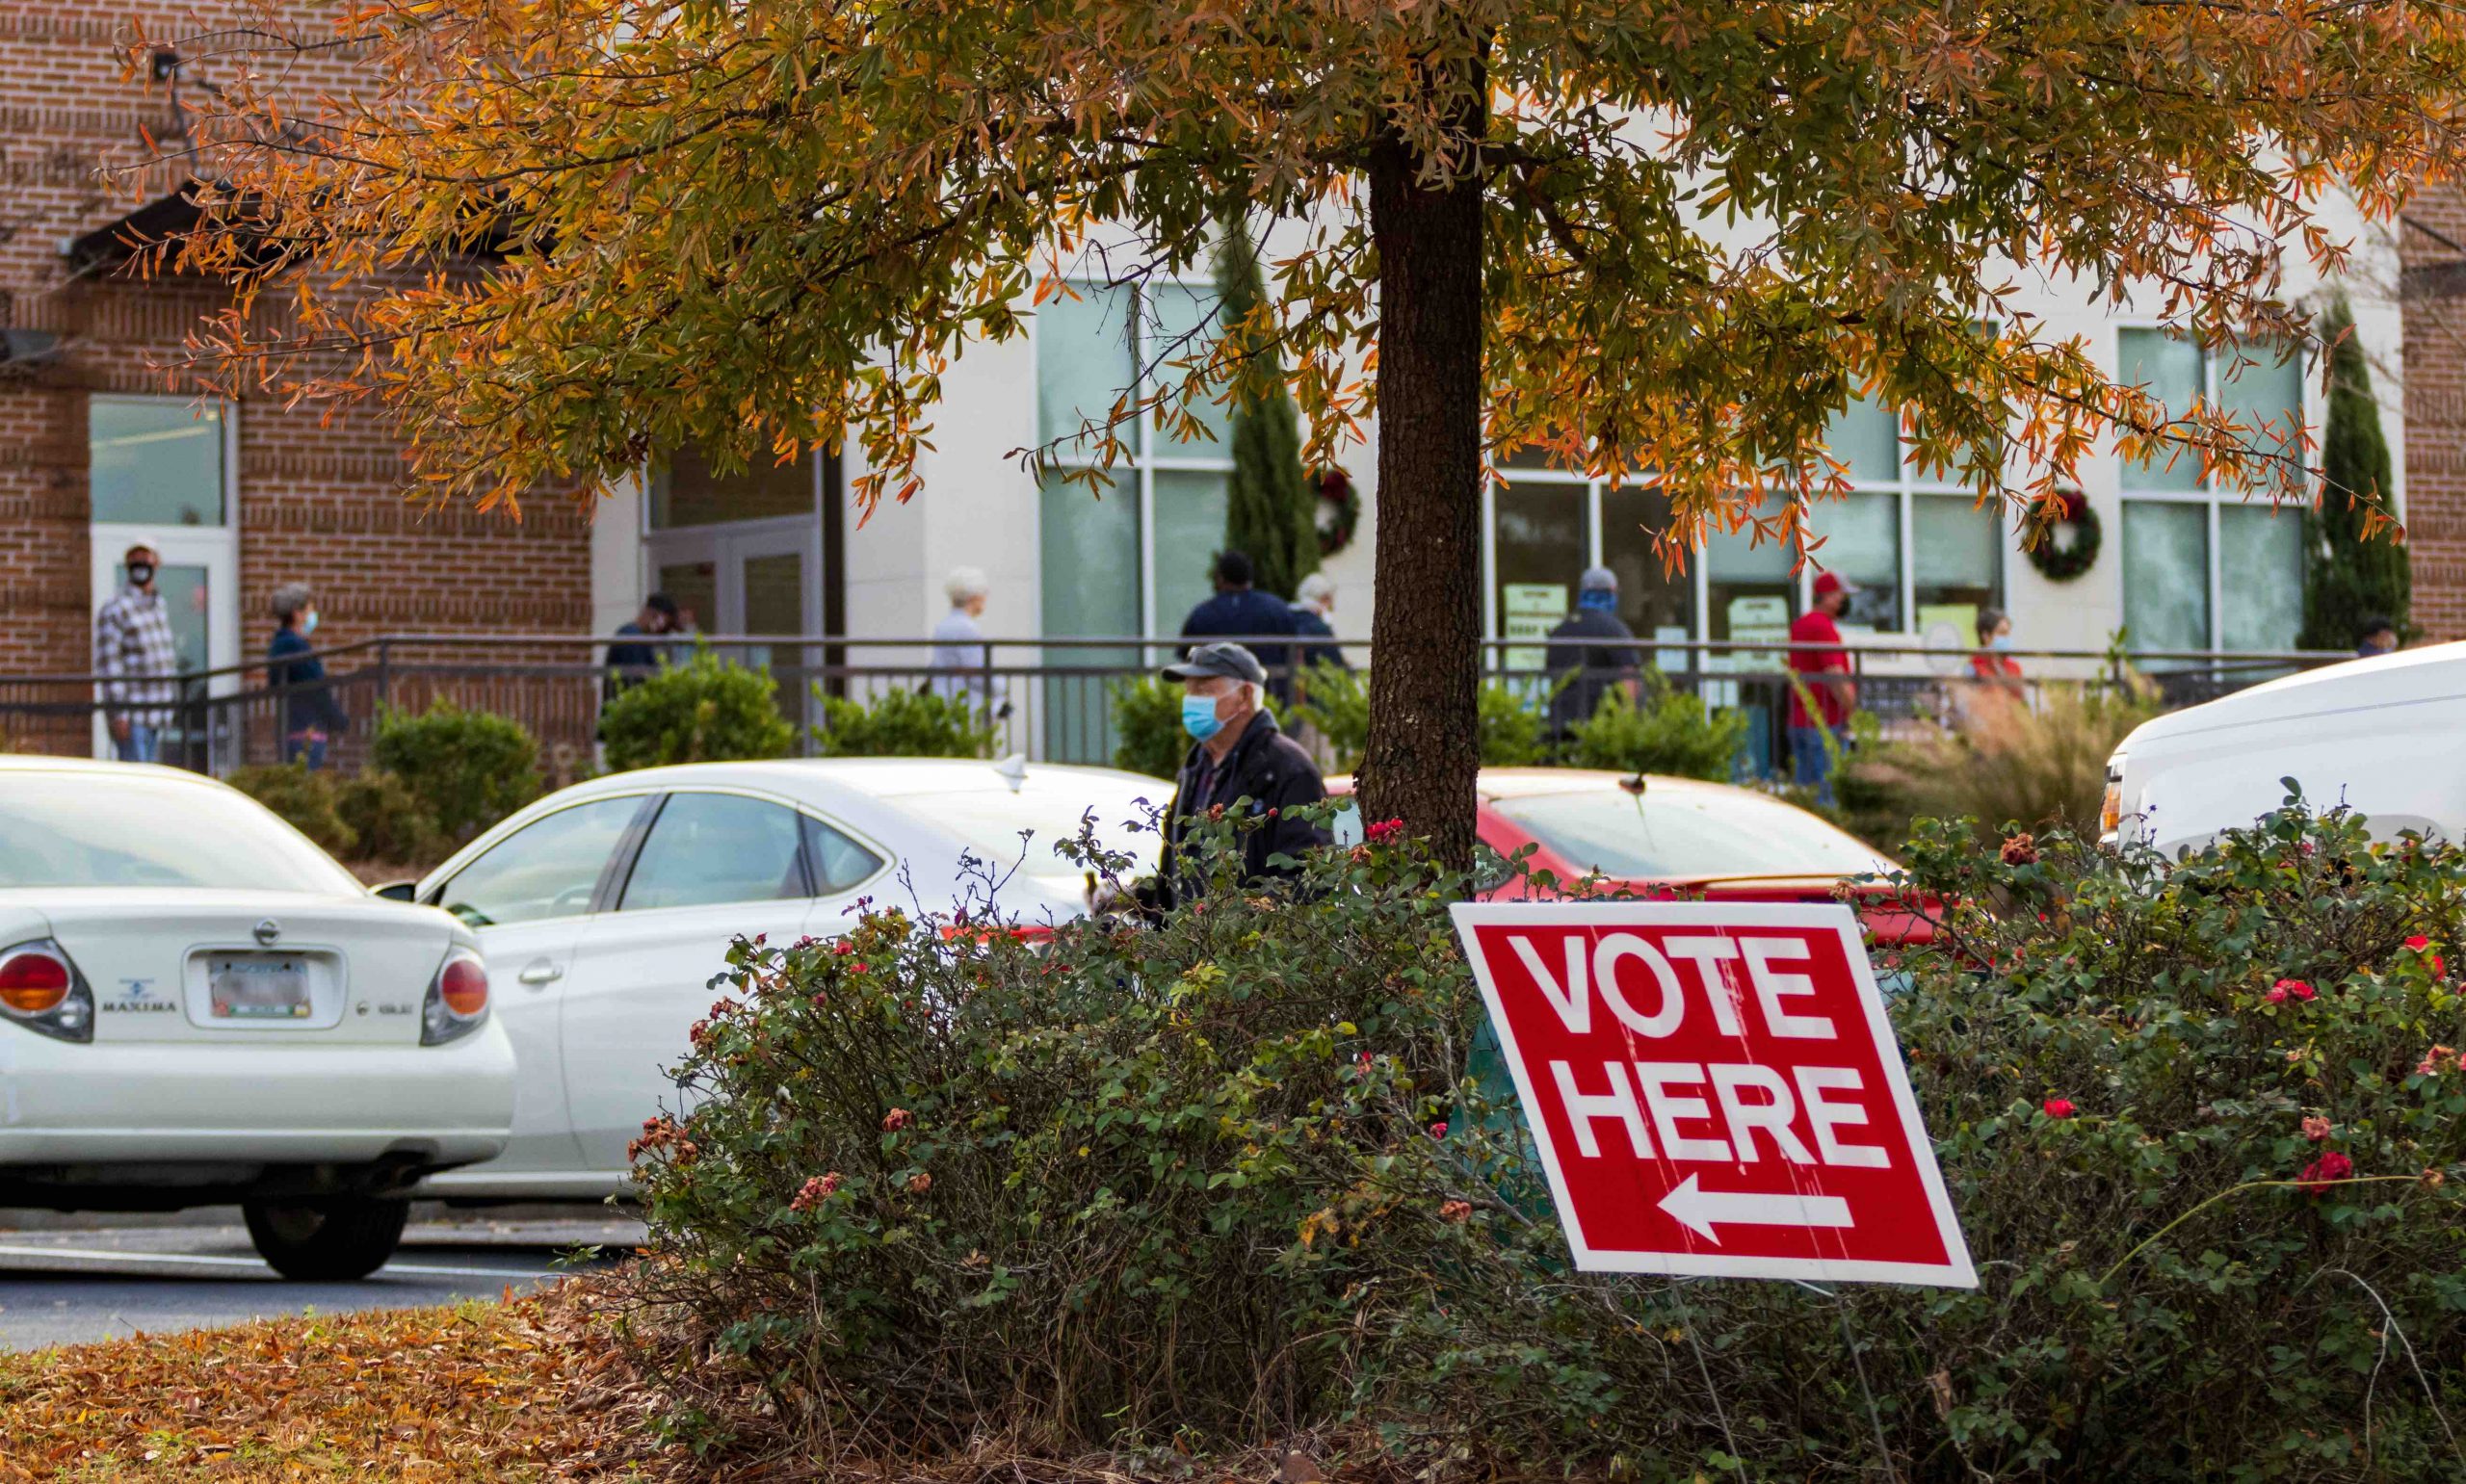 parking lot with "vote here" sign and line of people waiting outside in background